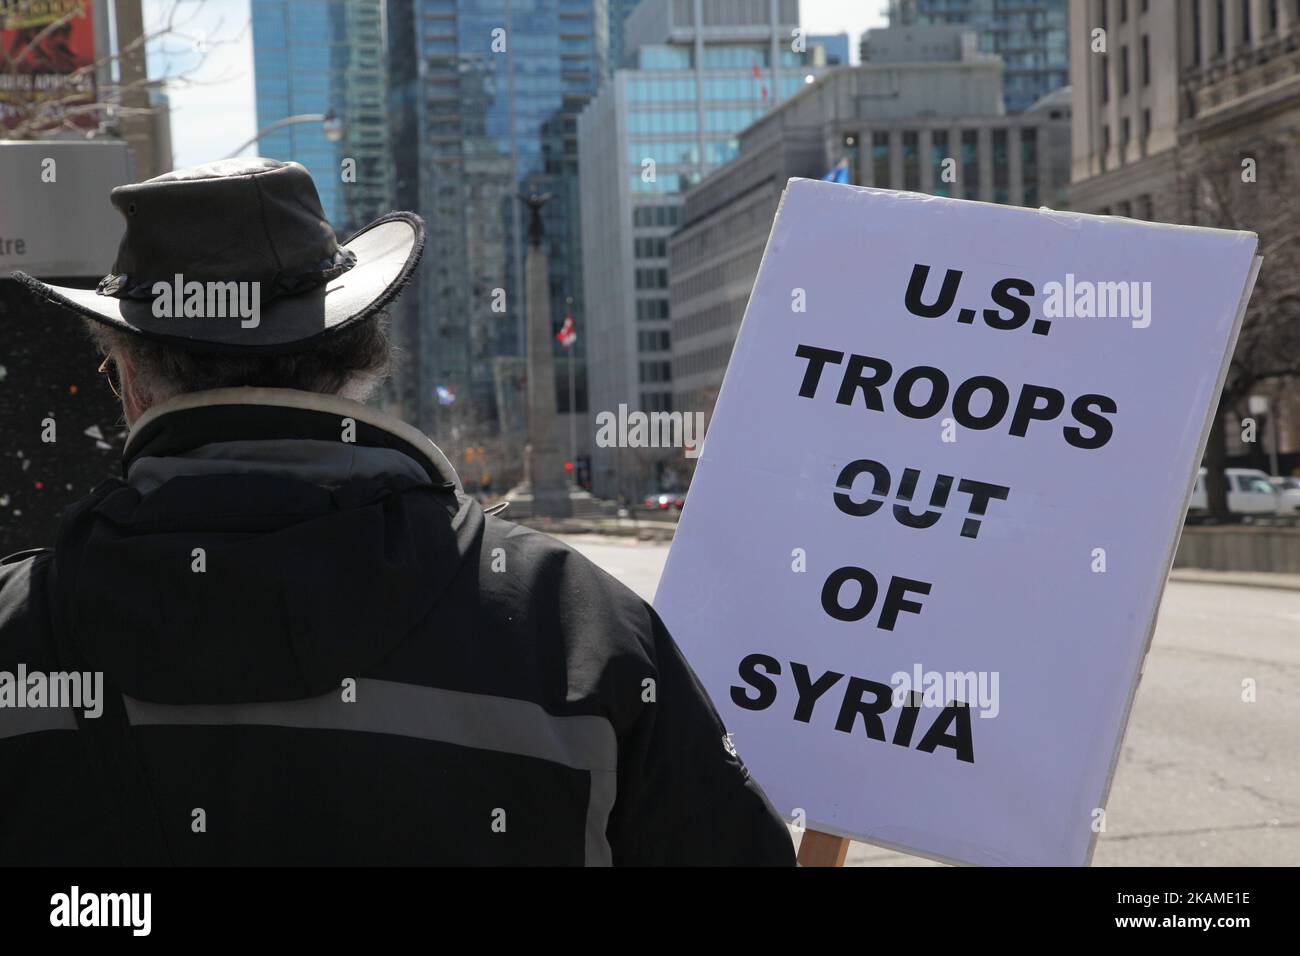 Man holds a sign saying 'U.S. Troops out of Syria' during a protest against US President Donald Trump's decision to launch airstrikes against Syria on April 8, 2017 in Toronto, Ontario Canada. Protestors gathered to outside the American Consulate in Toronto to denounce this week's airstrikes against the Syrian regime. America launched a missile strike against Syria for the first time since the civil war began, targeting an airbase in the small town of Idlib from which the United States claims this week’s chemical weapons attack on civilians was launched by Bashar al-Assad’s regime. (Photo by C Stock Photo